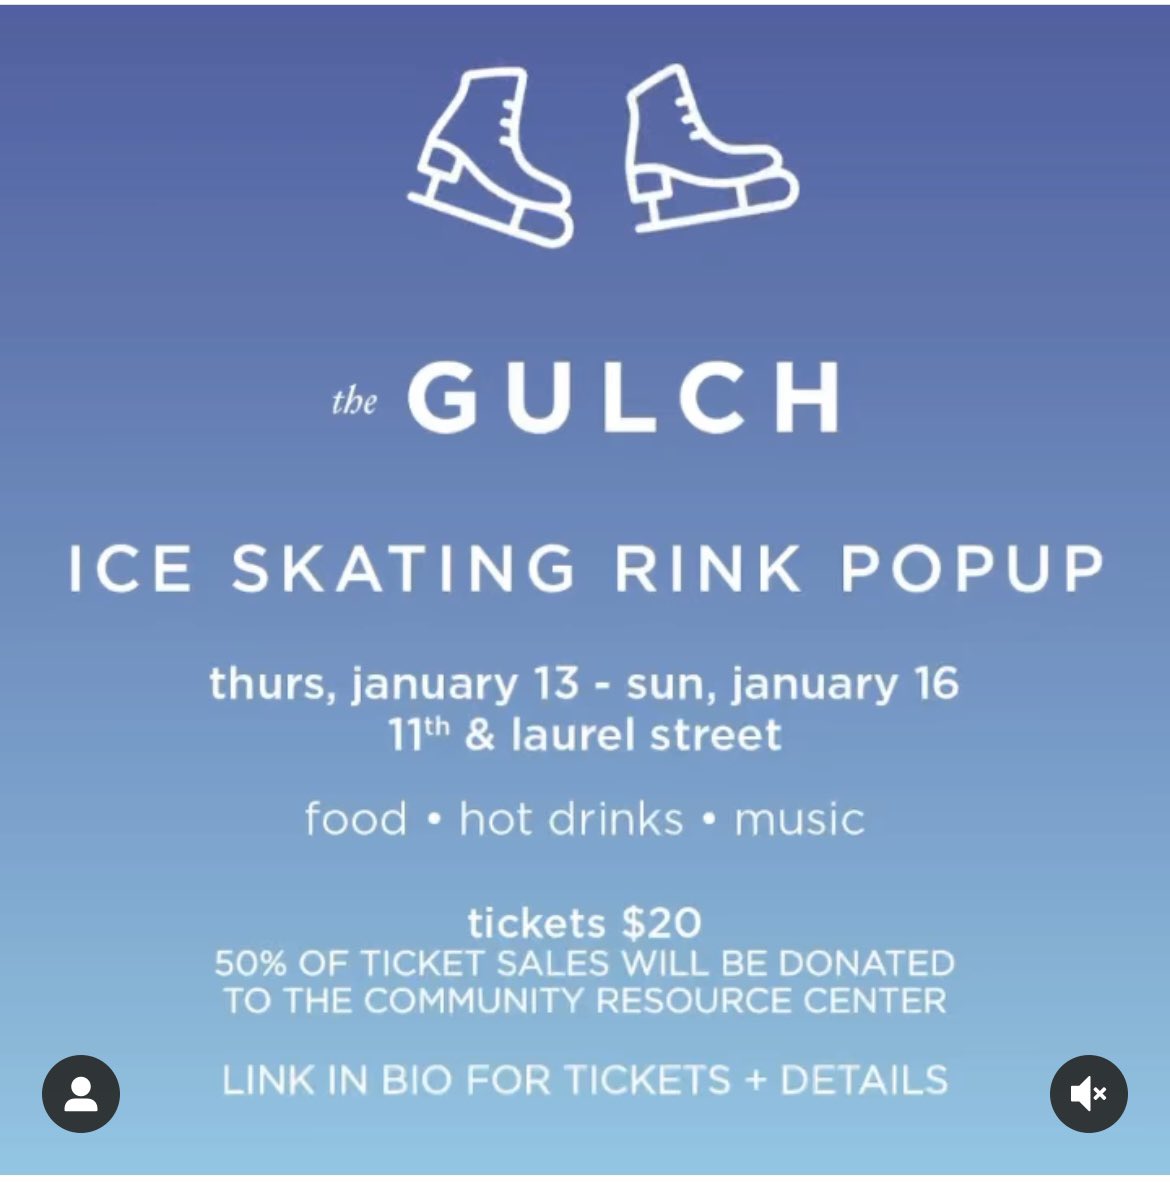 Glide into the new year with #thegulch at their ice skating rink pop up Thursday, January 13th - Sunday, January 16th.
Details and ticket link in the bio at @thegulchnashville. 
#nashville #nashvilletn
#downtownnashville #one22onebroadway #1221broadway #nashvilleliving #gbtrealty